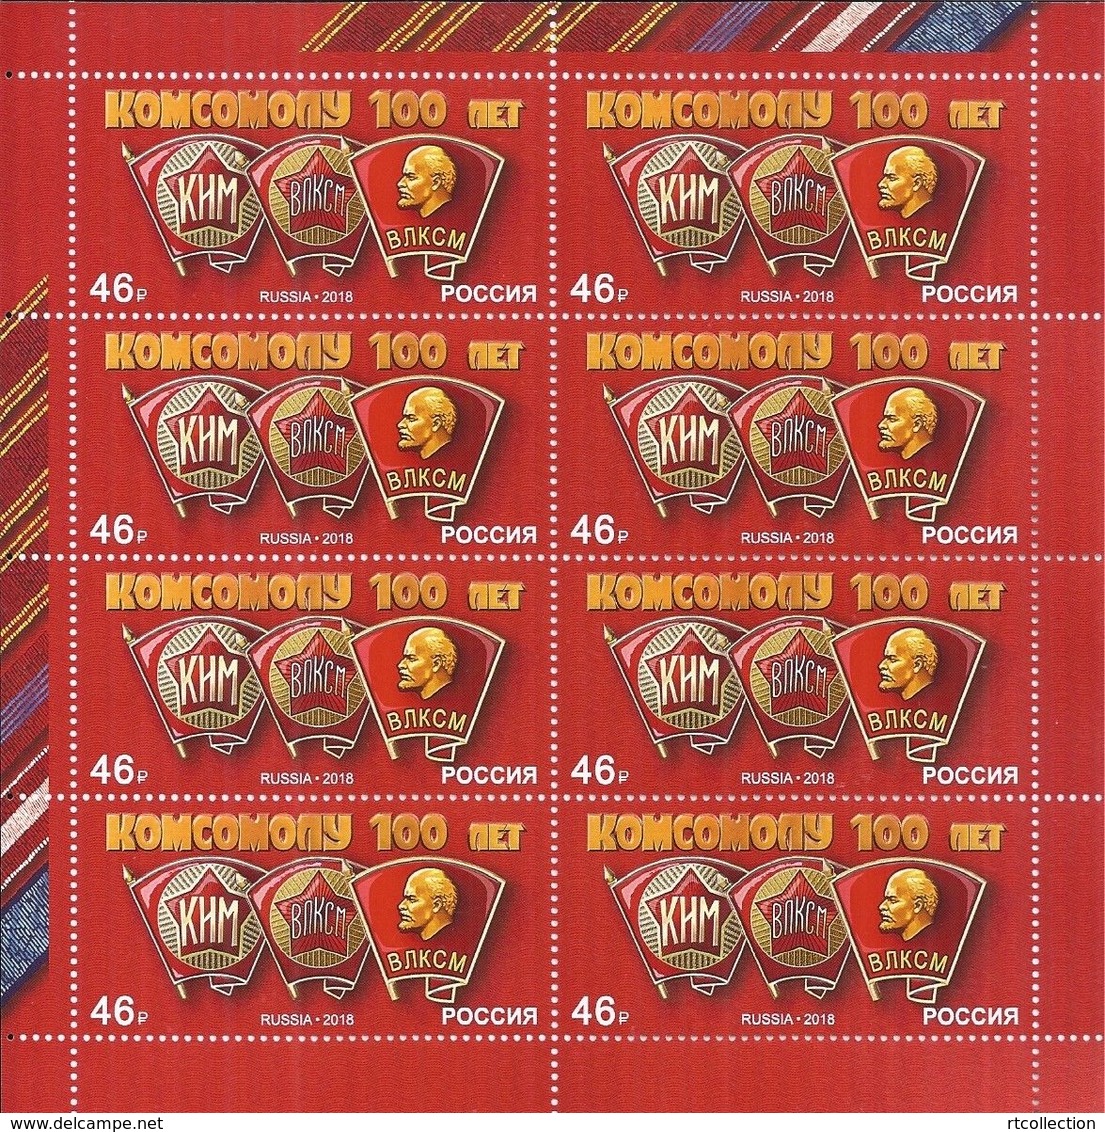 Russia 2018 Sheet 100th Anniversary Komsomol All Union Lenin Communist Youth League People Organization Meda LStamps MNH - Stamps